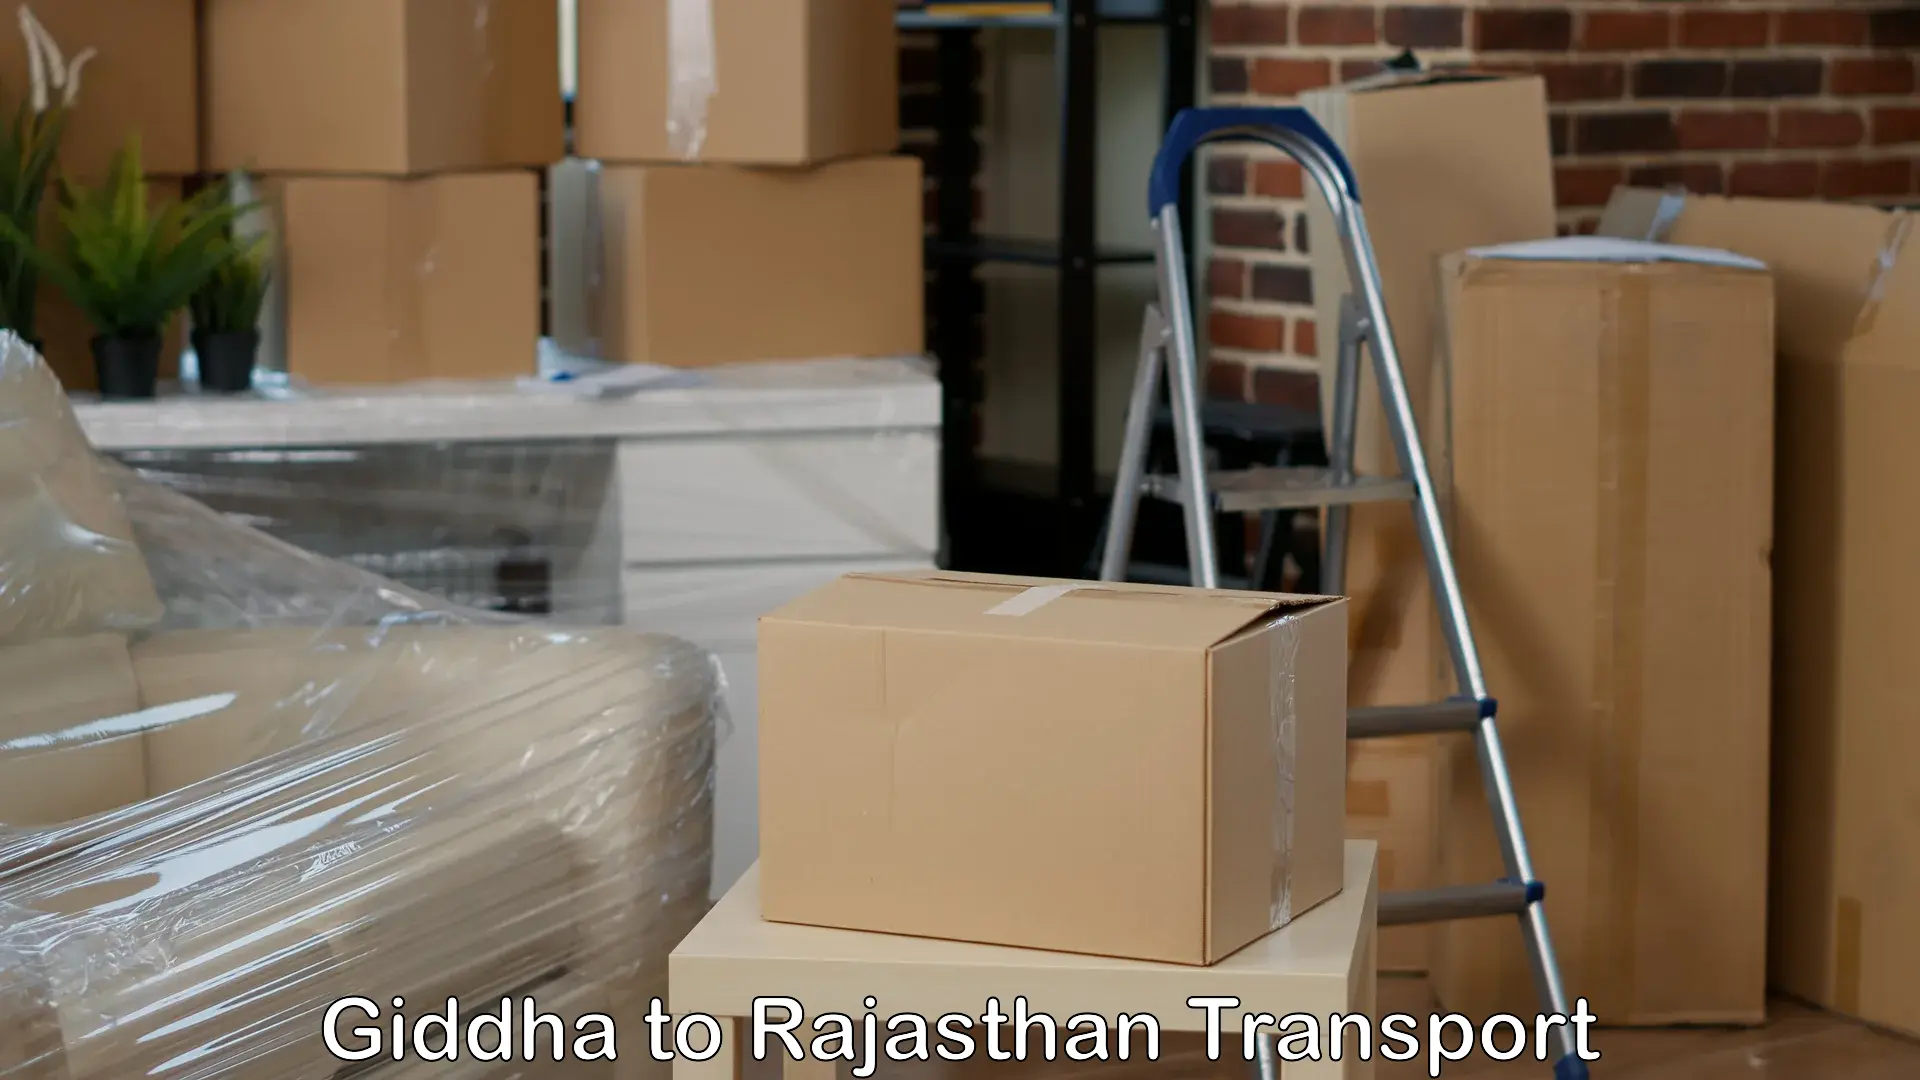 Commercial transport service Giddha to Jaipur